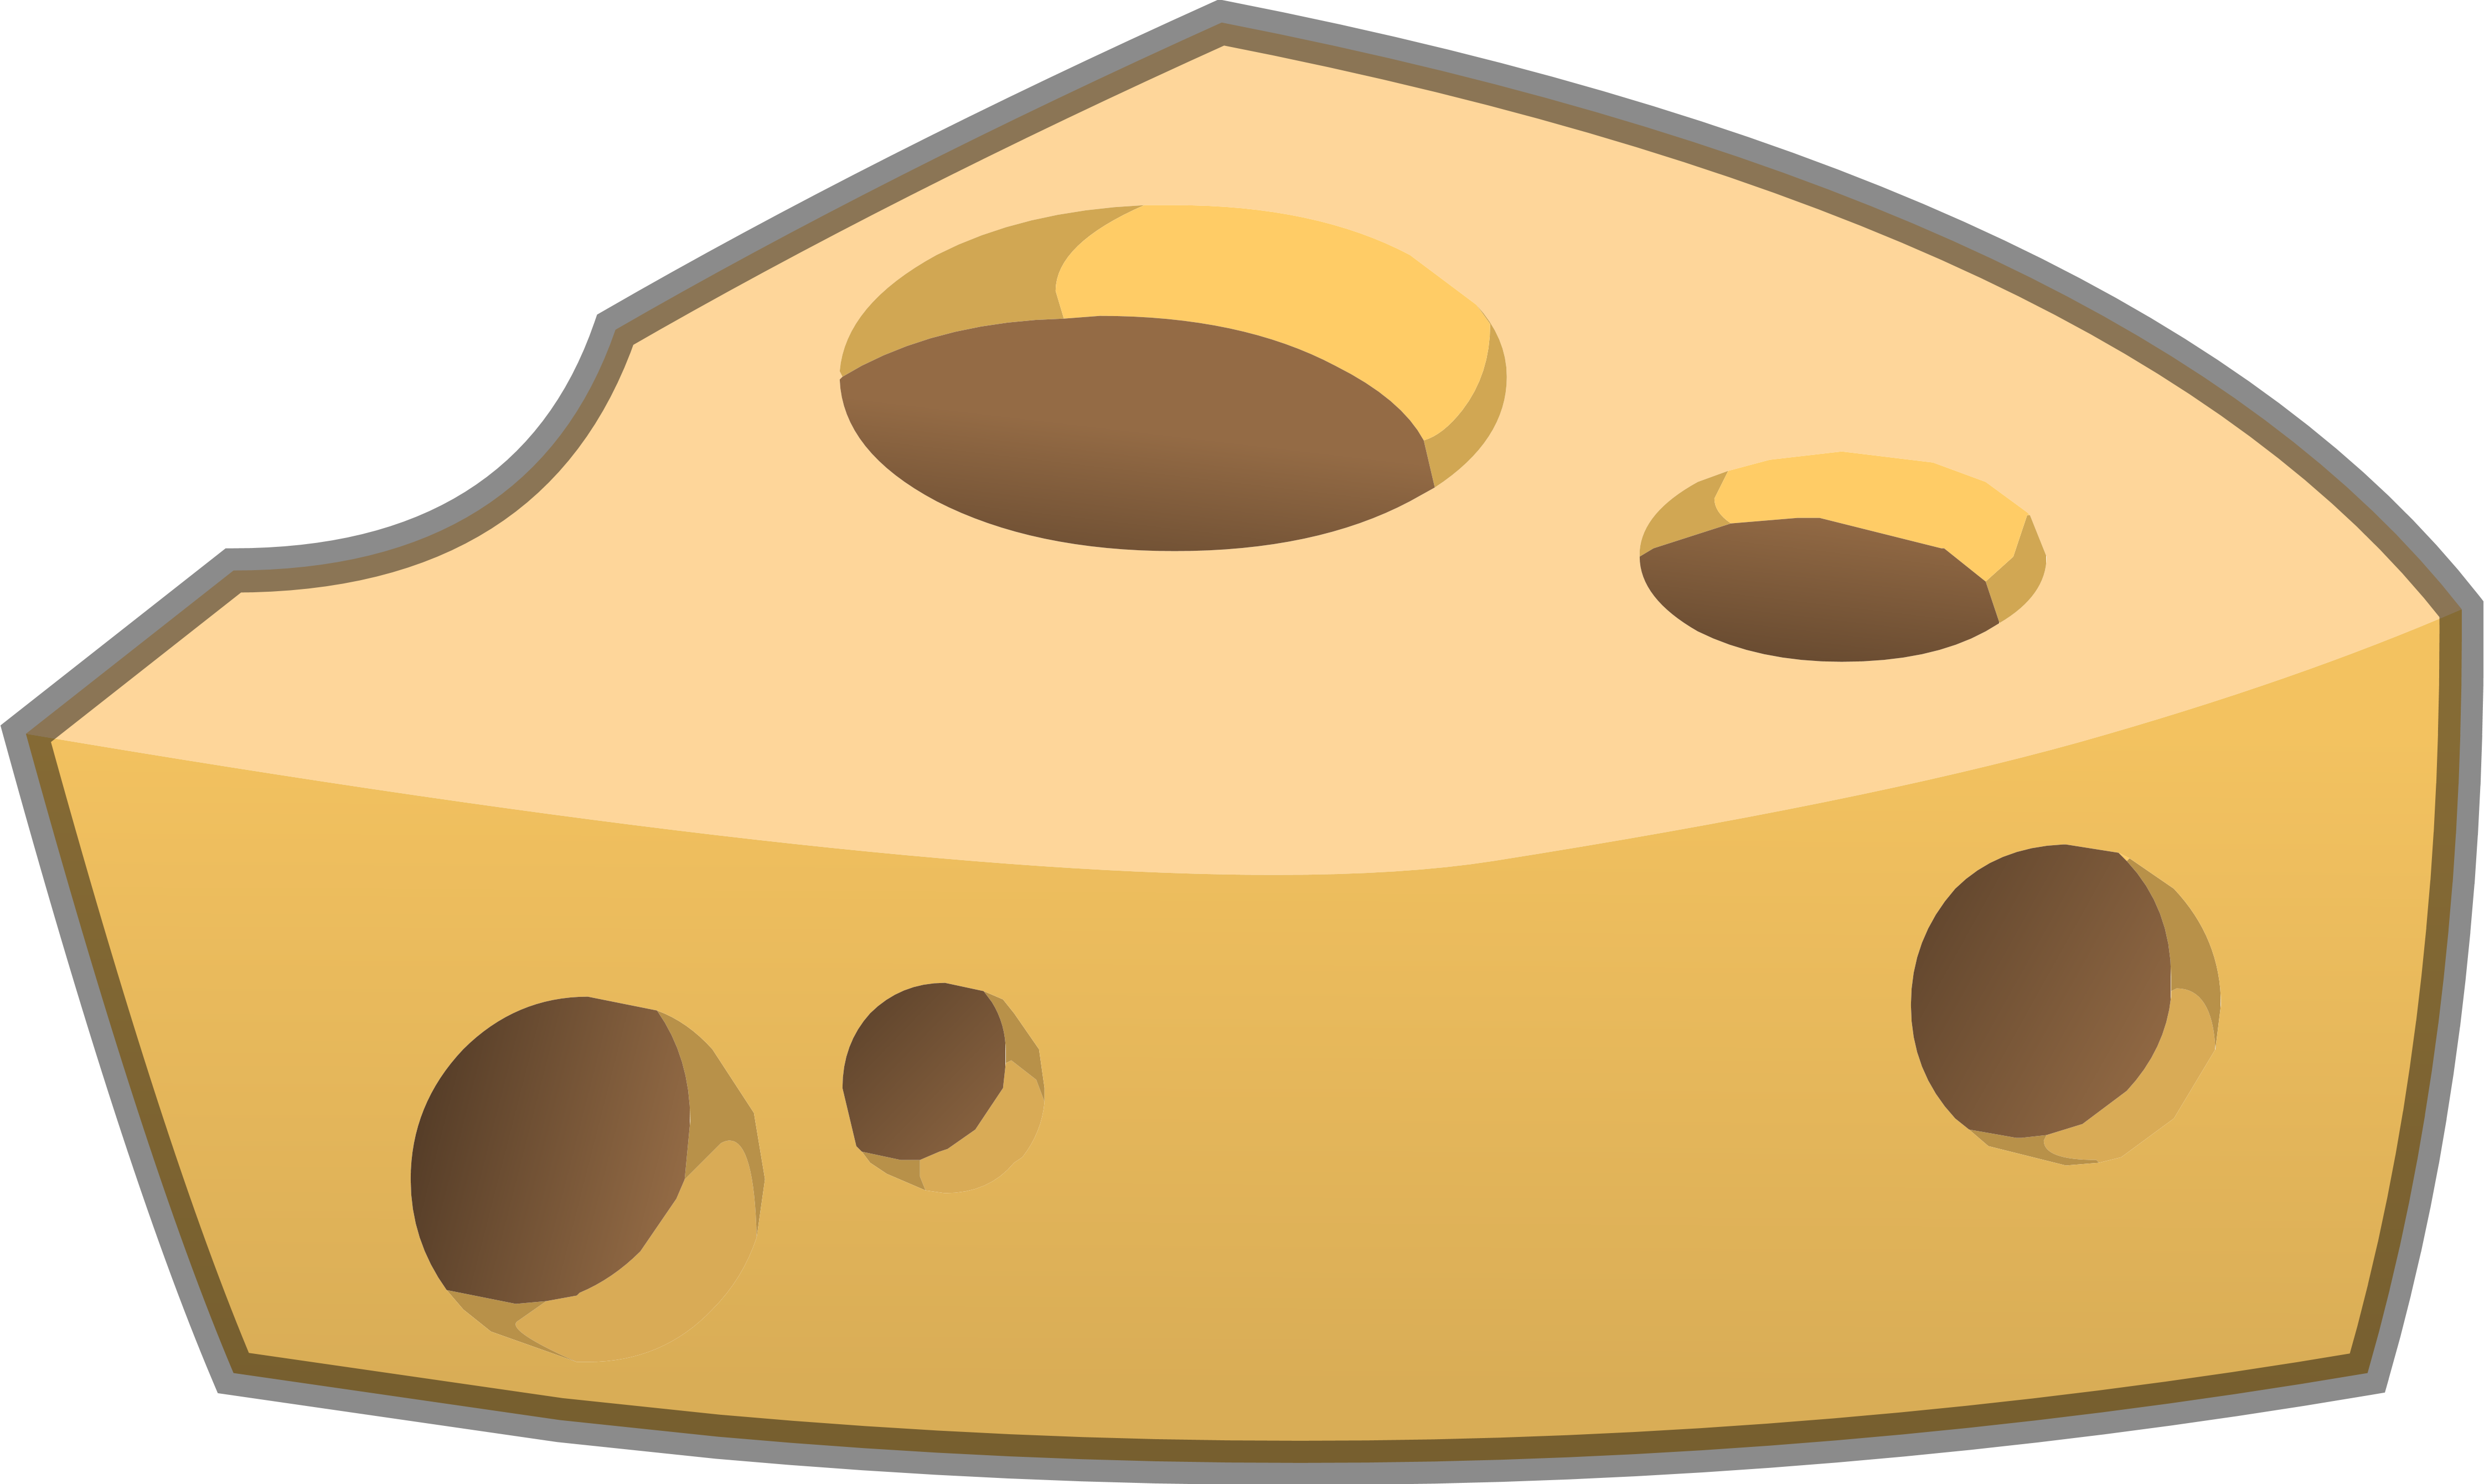 transformice codes for cheese 2014